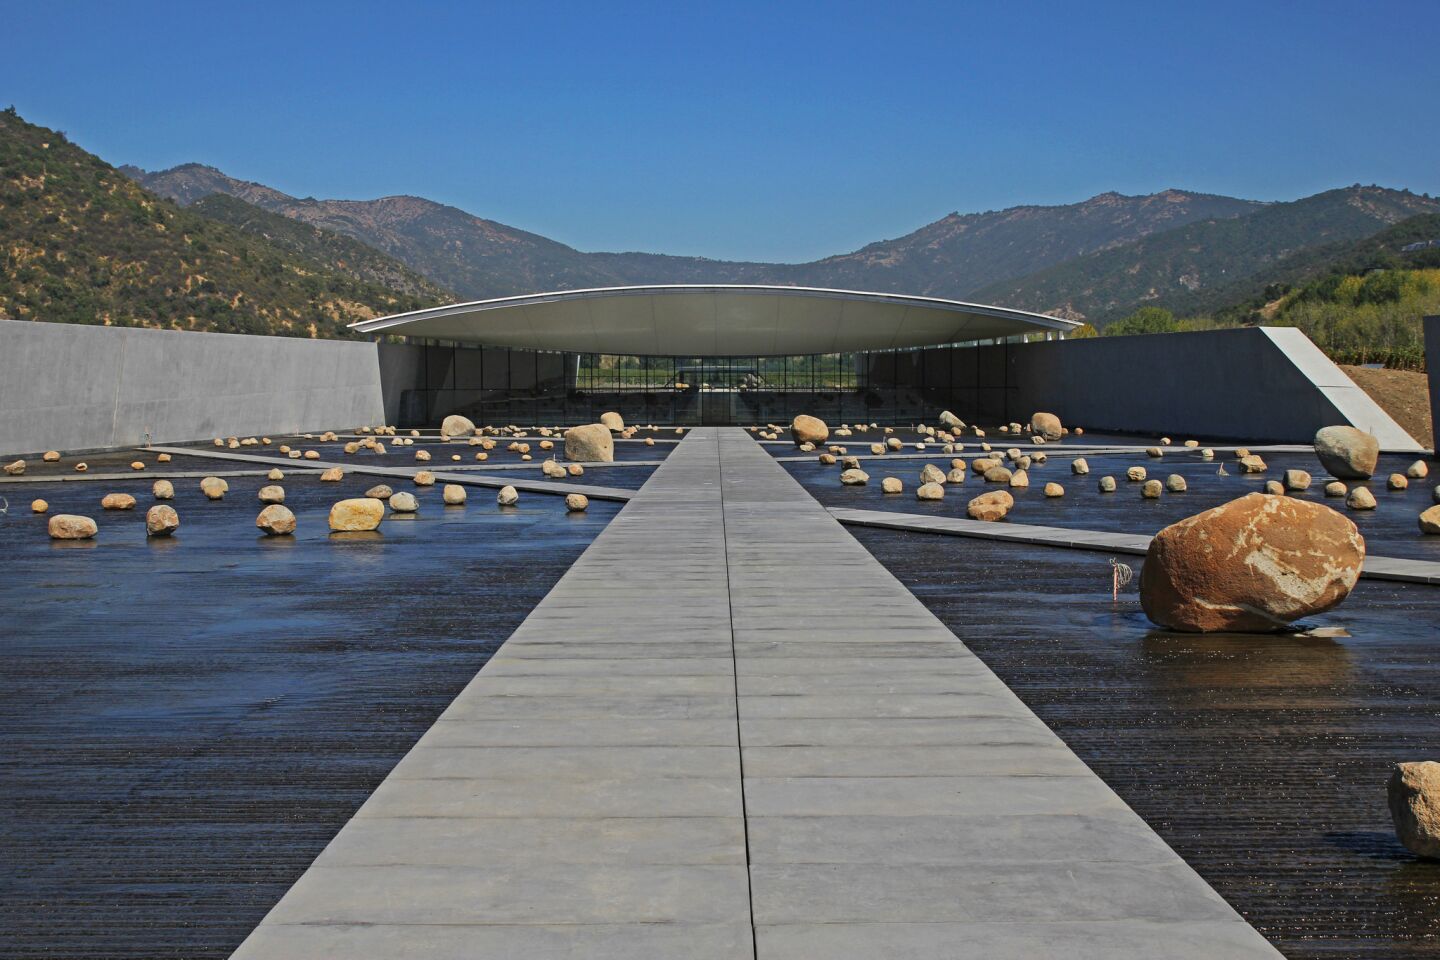 Radic's winery for Vik Vineyards near Rancagua features a large water plaza studded with boulders. Underneath the plaza is a warehouse where the wine is aged. The water helps keep the room cool.